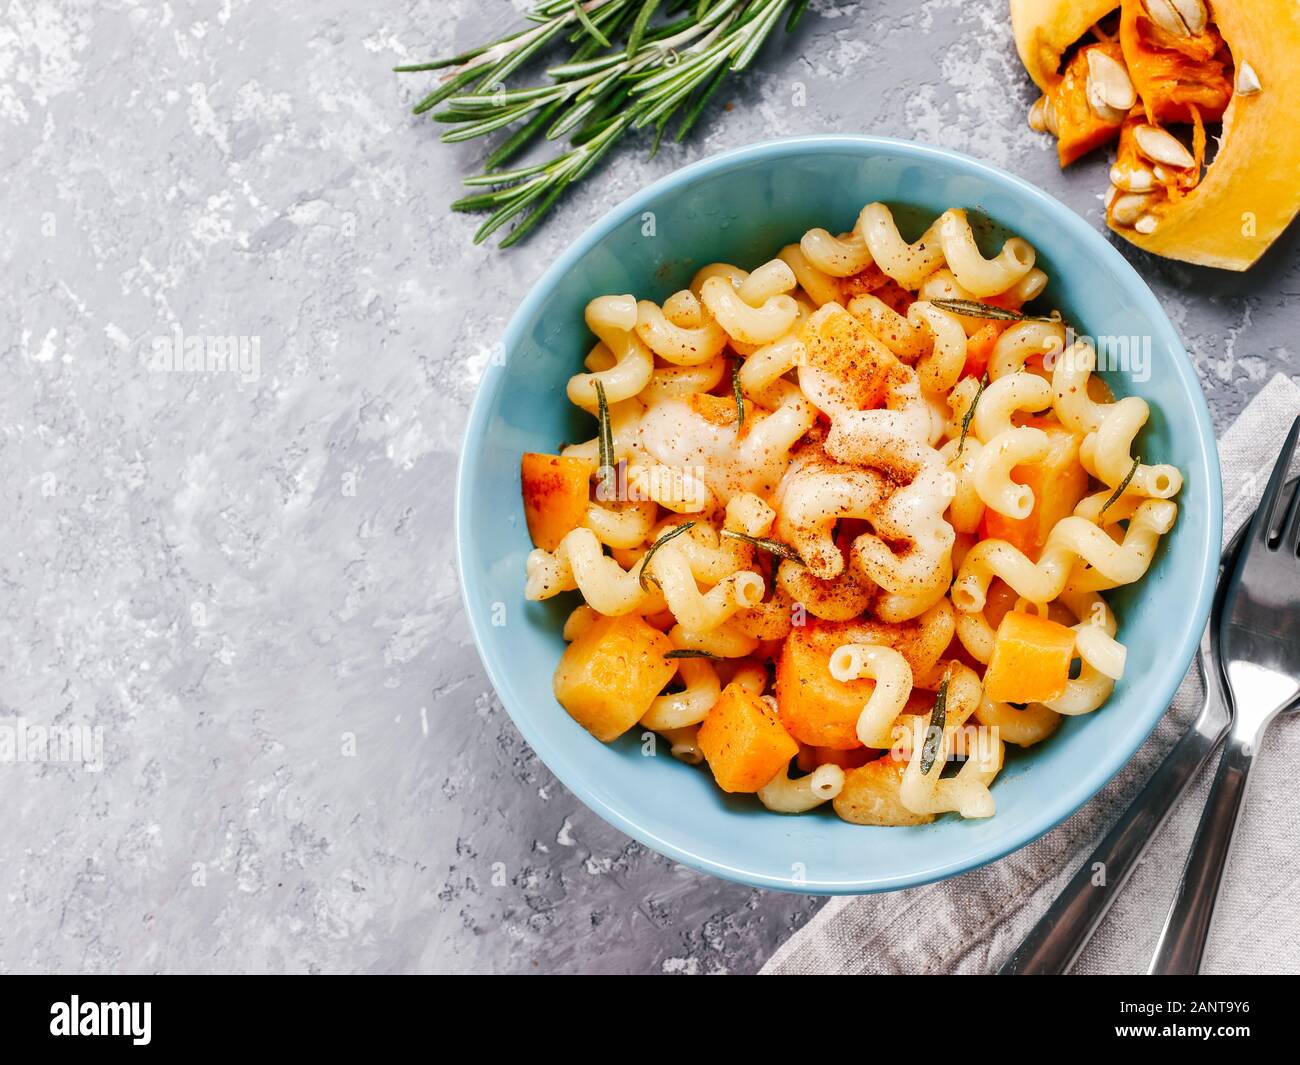 Fusilli pasta with pumpkin, rosemary and brie cheese. Idea recipe pasta. Vegetarian food. Homemade pasta dish in blue bowl over gray concrete background. Copy space. Top view or flat lay. Stock Photo